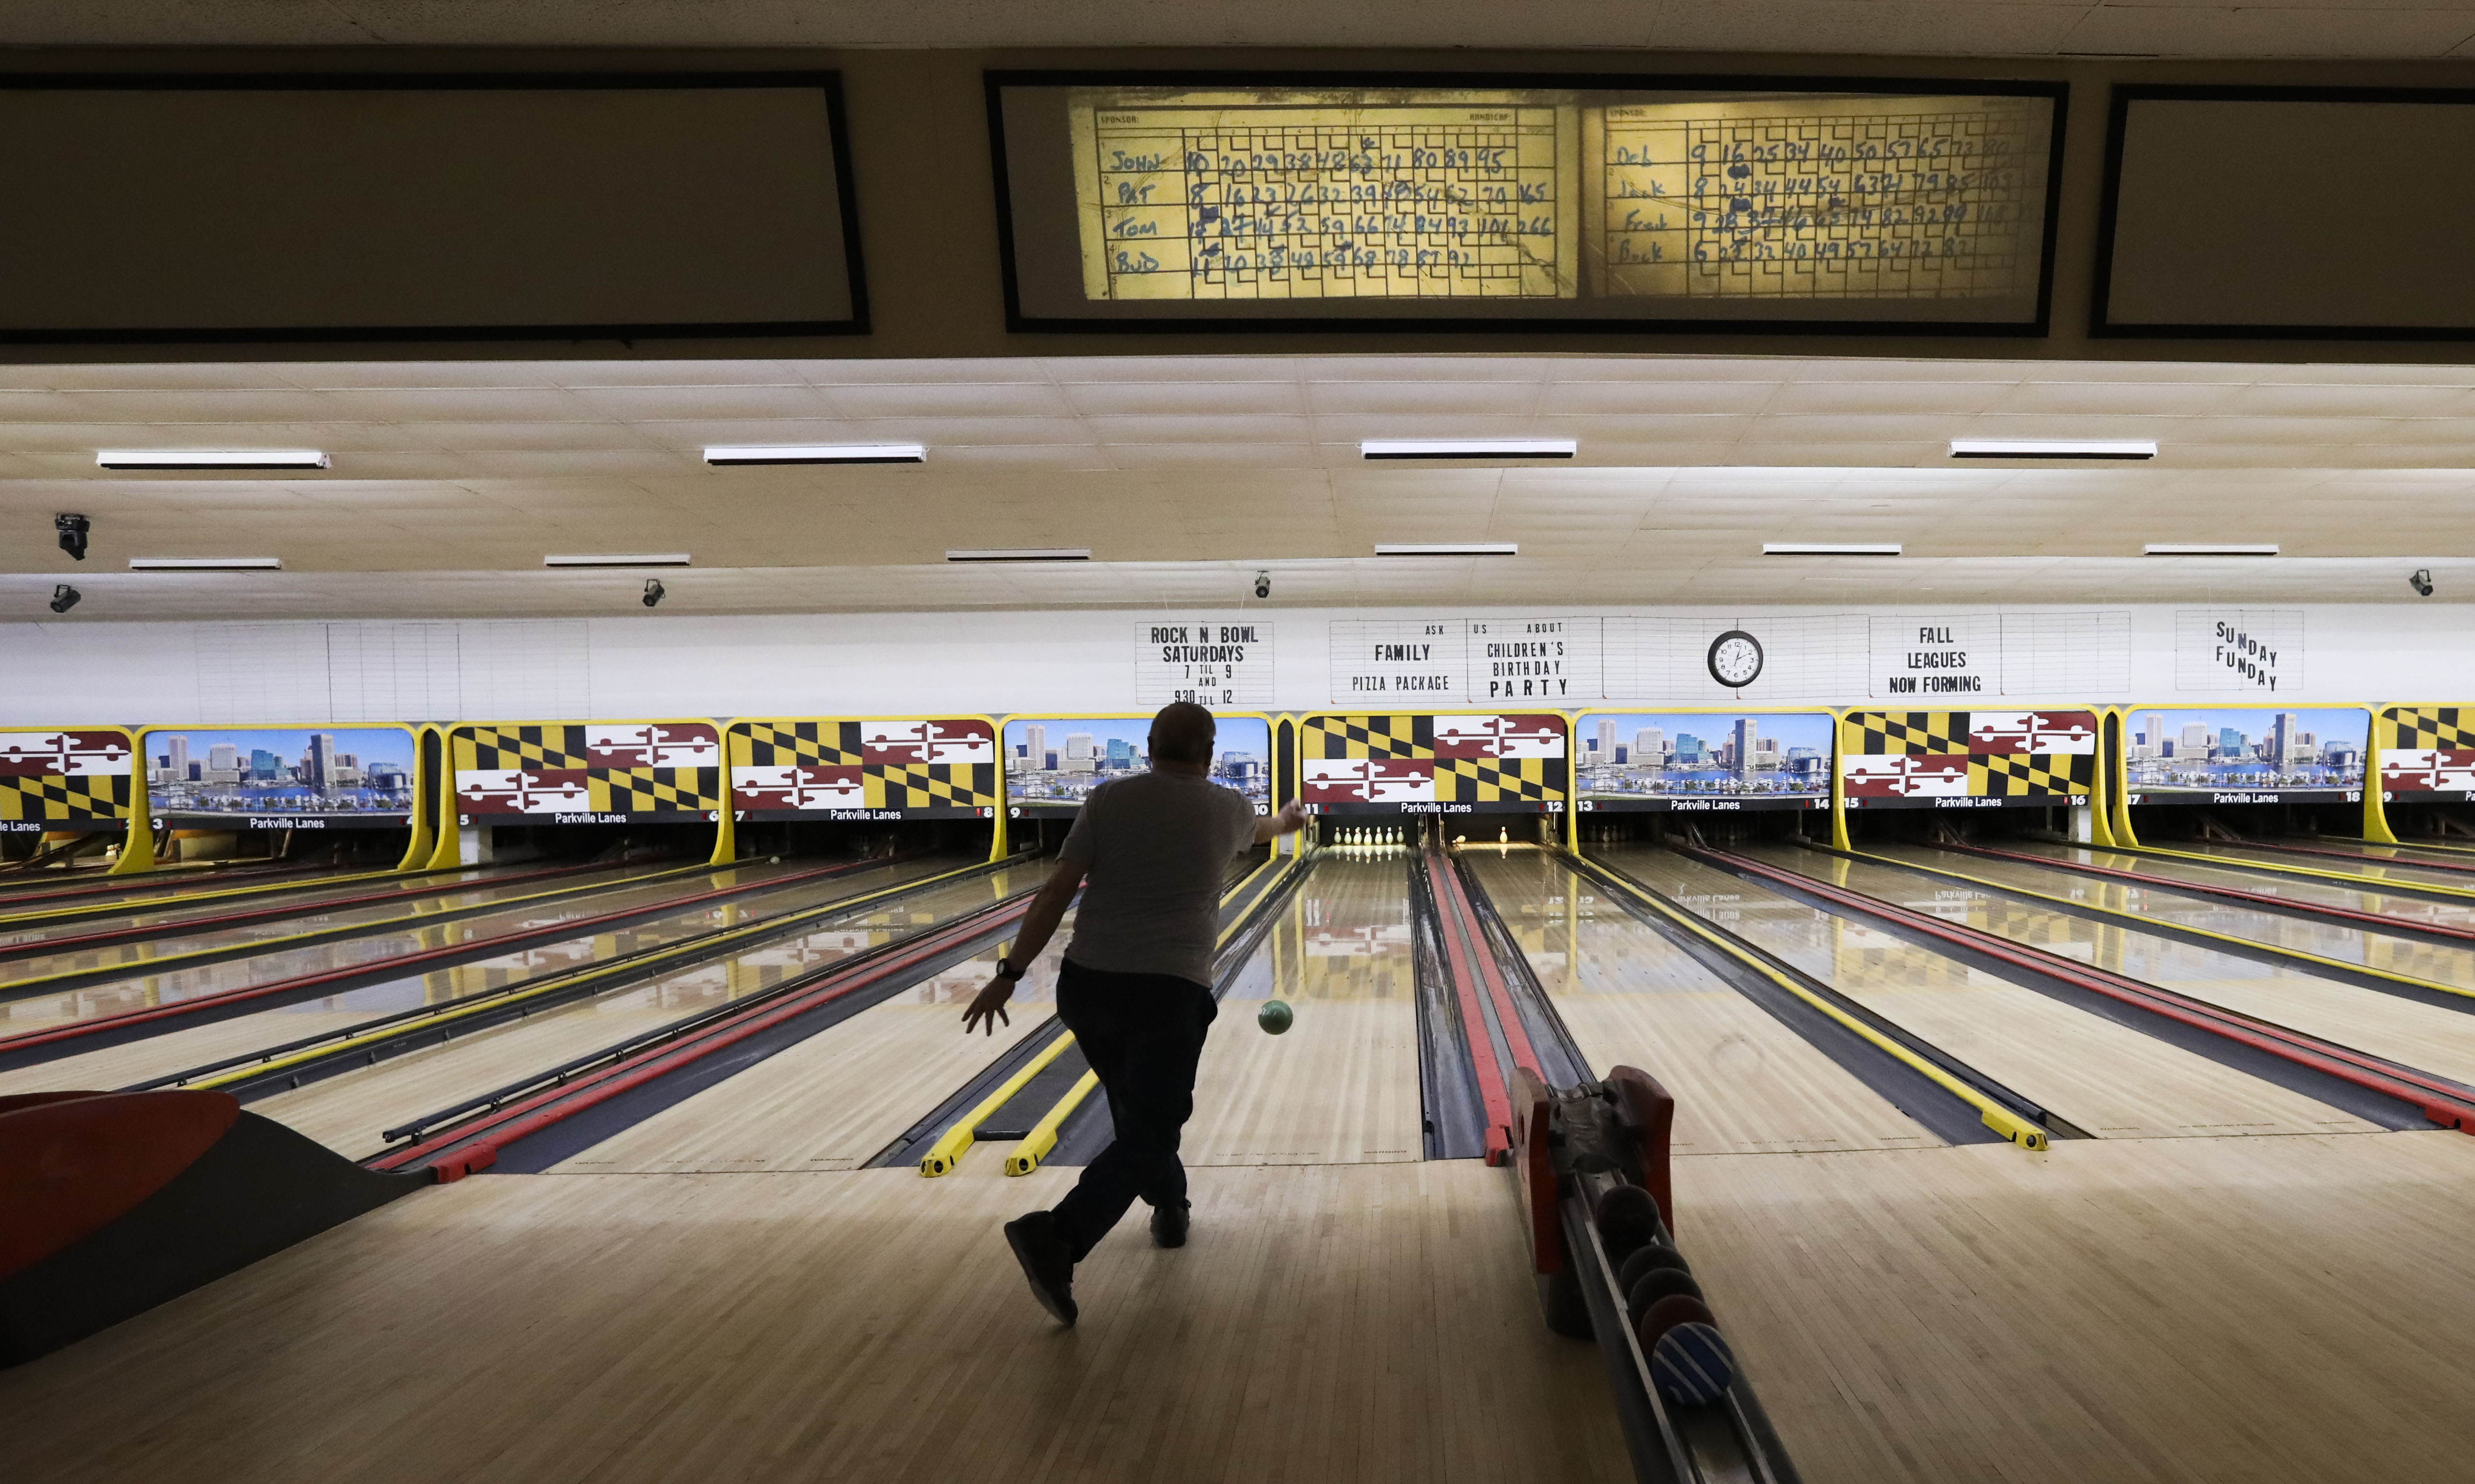 Patterson Bowling Center, the oldest continuously operating